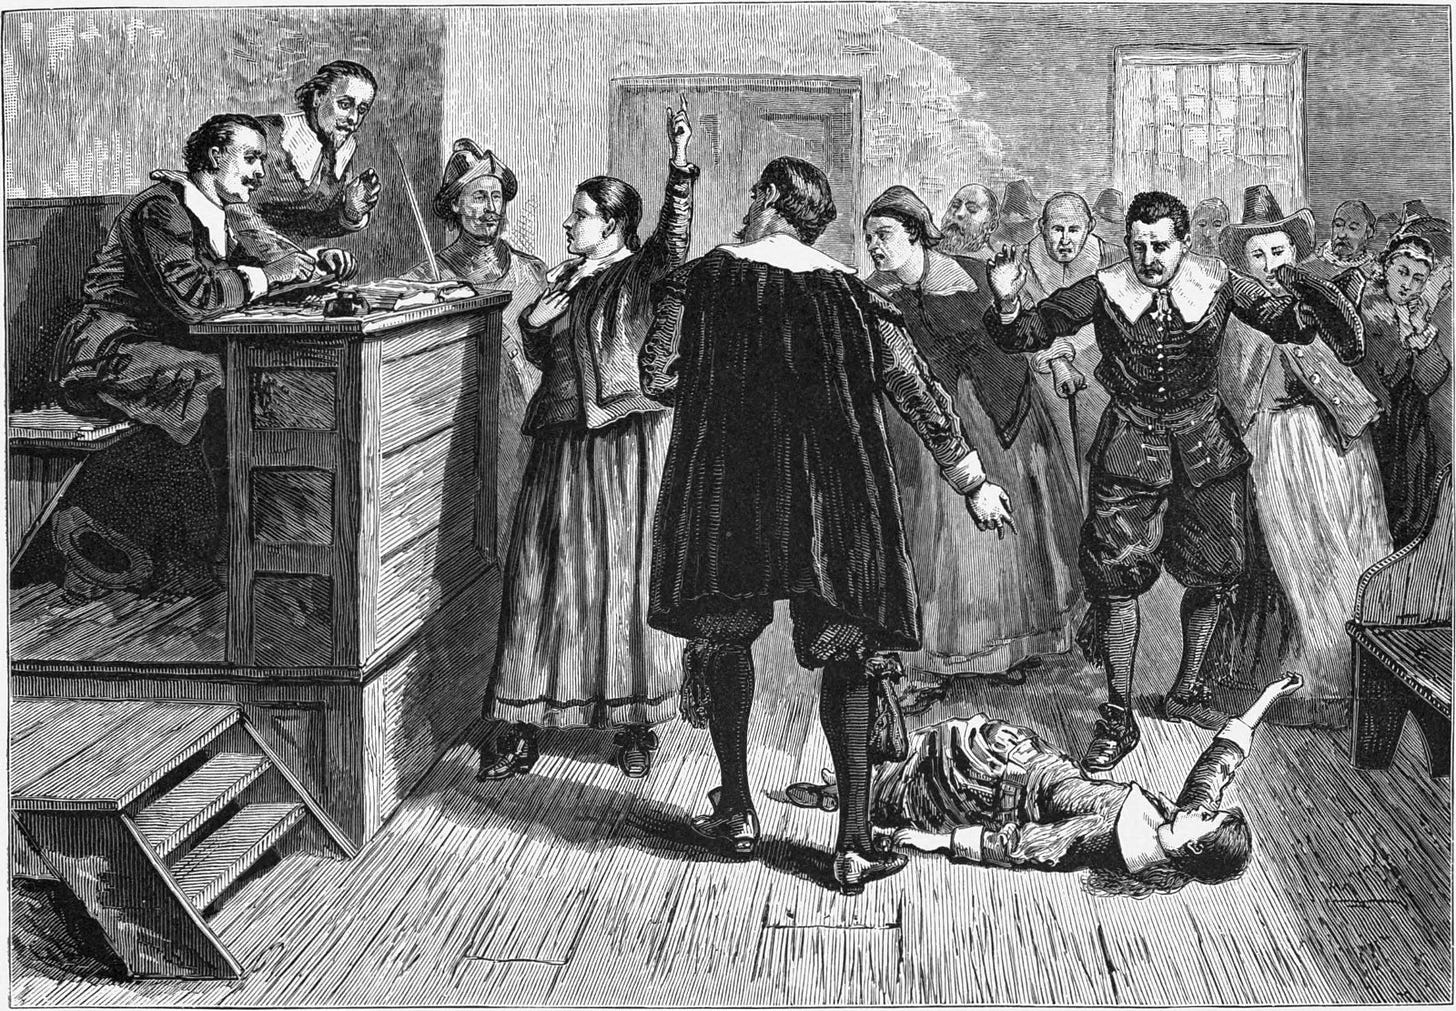 Salem witch trials: a girl lays on the ground as a courtroom full of people point and gesture.